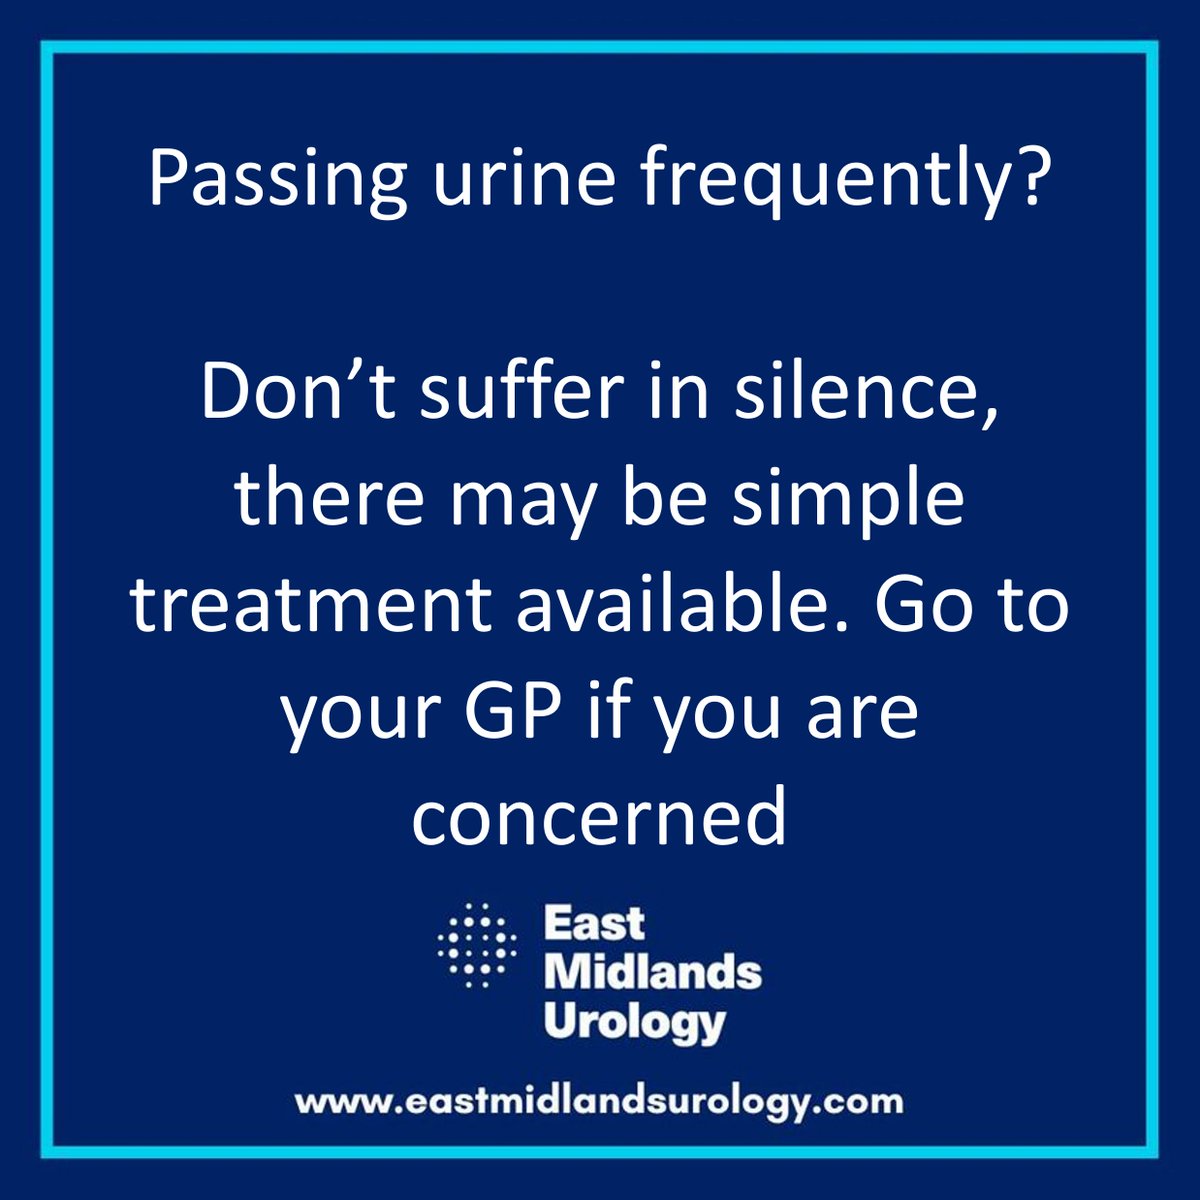 If you are passing urine frequently, have pain when passing urine and pain when ejaculating, it could be prostatitis. Don't suffer in silence, see your GP. Find out more here eastmidlandsurology.com/services/prost… #prostatitis #prostateproblems